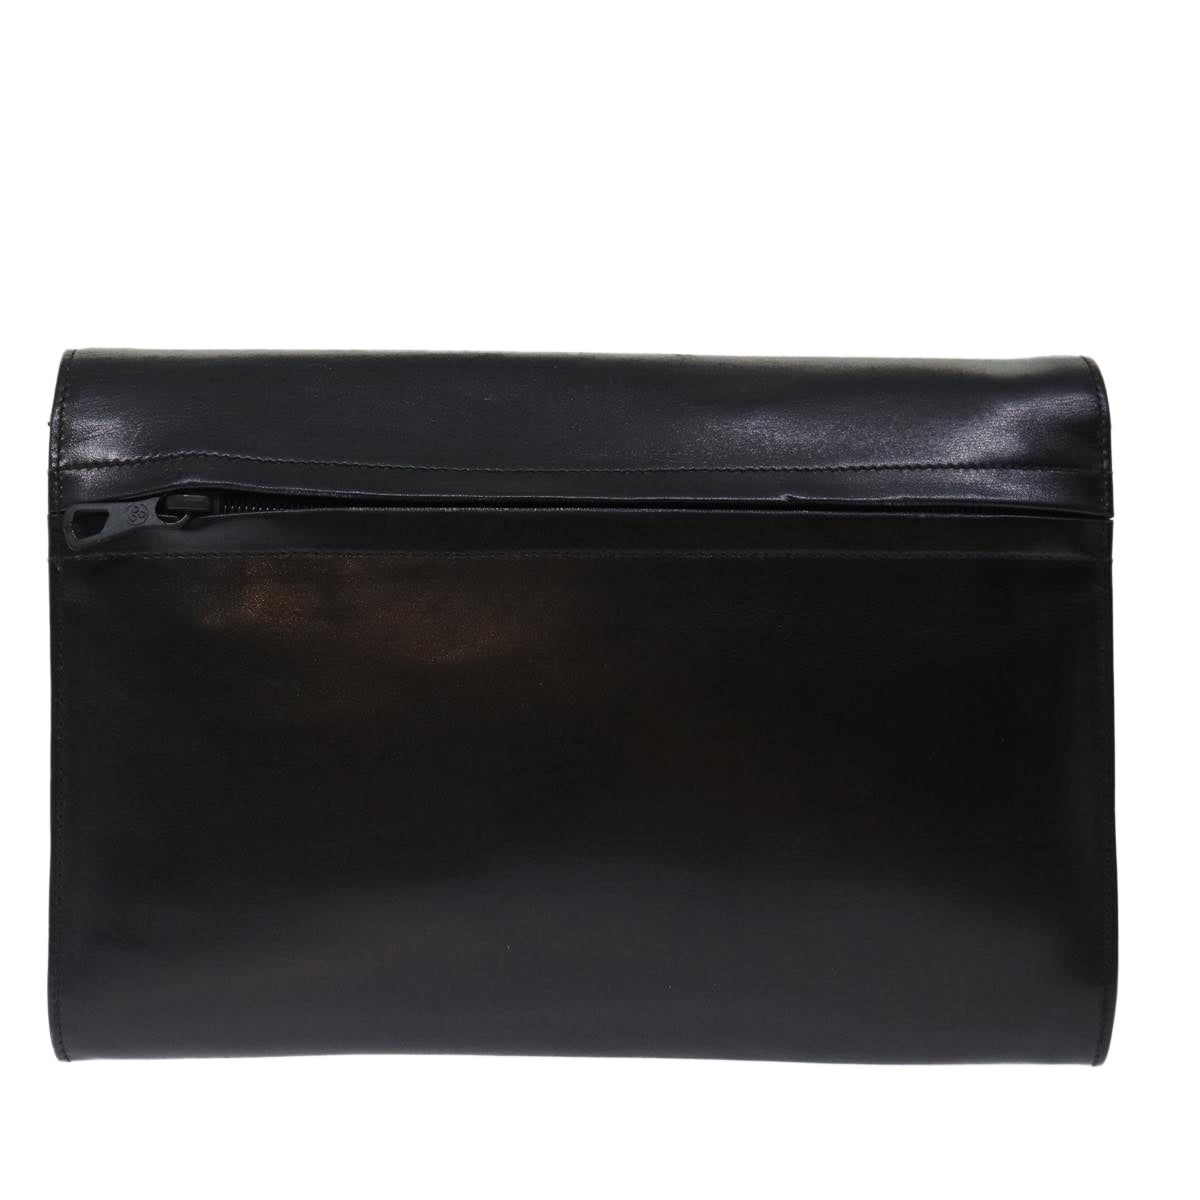 GIVENCHY Clutch Bag Leather Black Auth bs13389 - 0